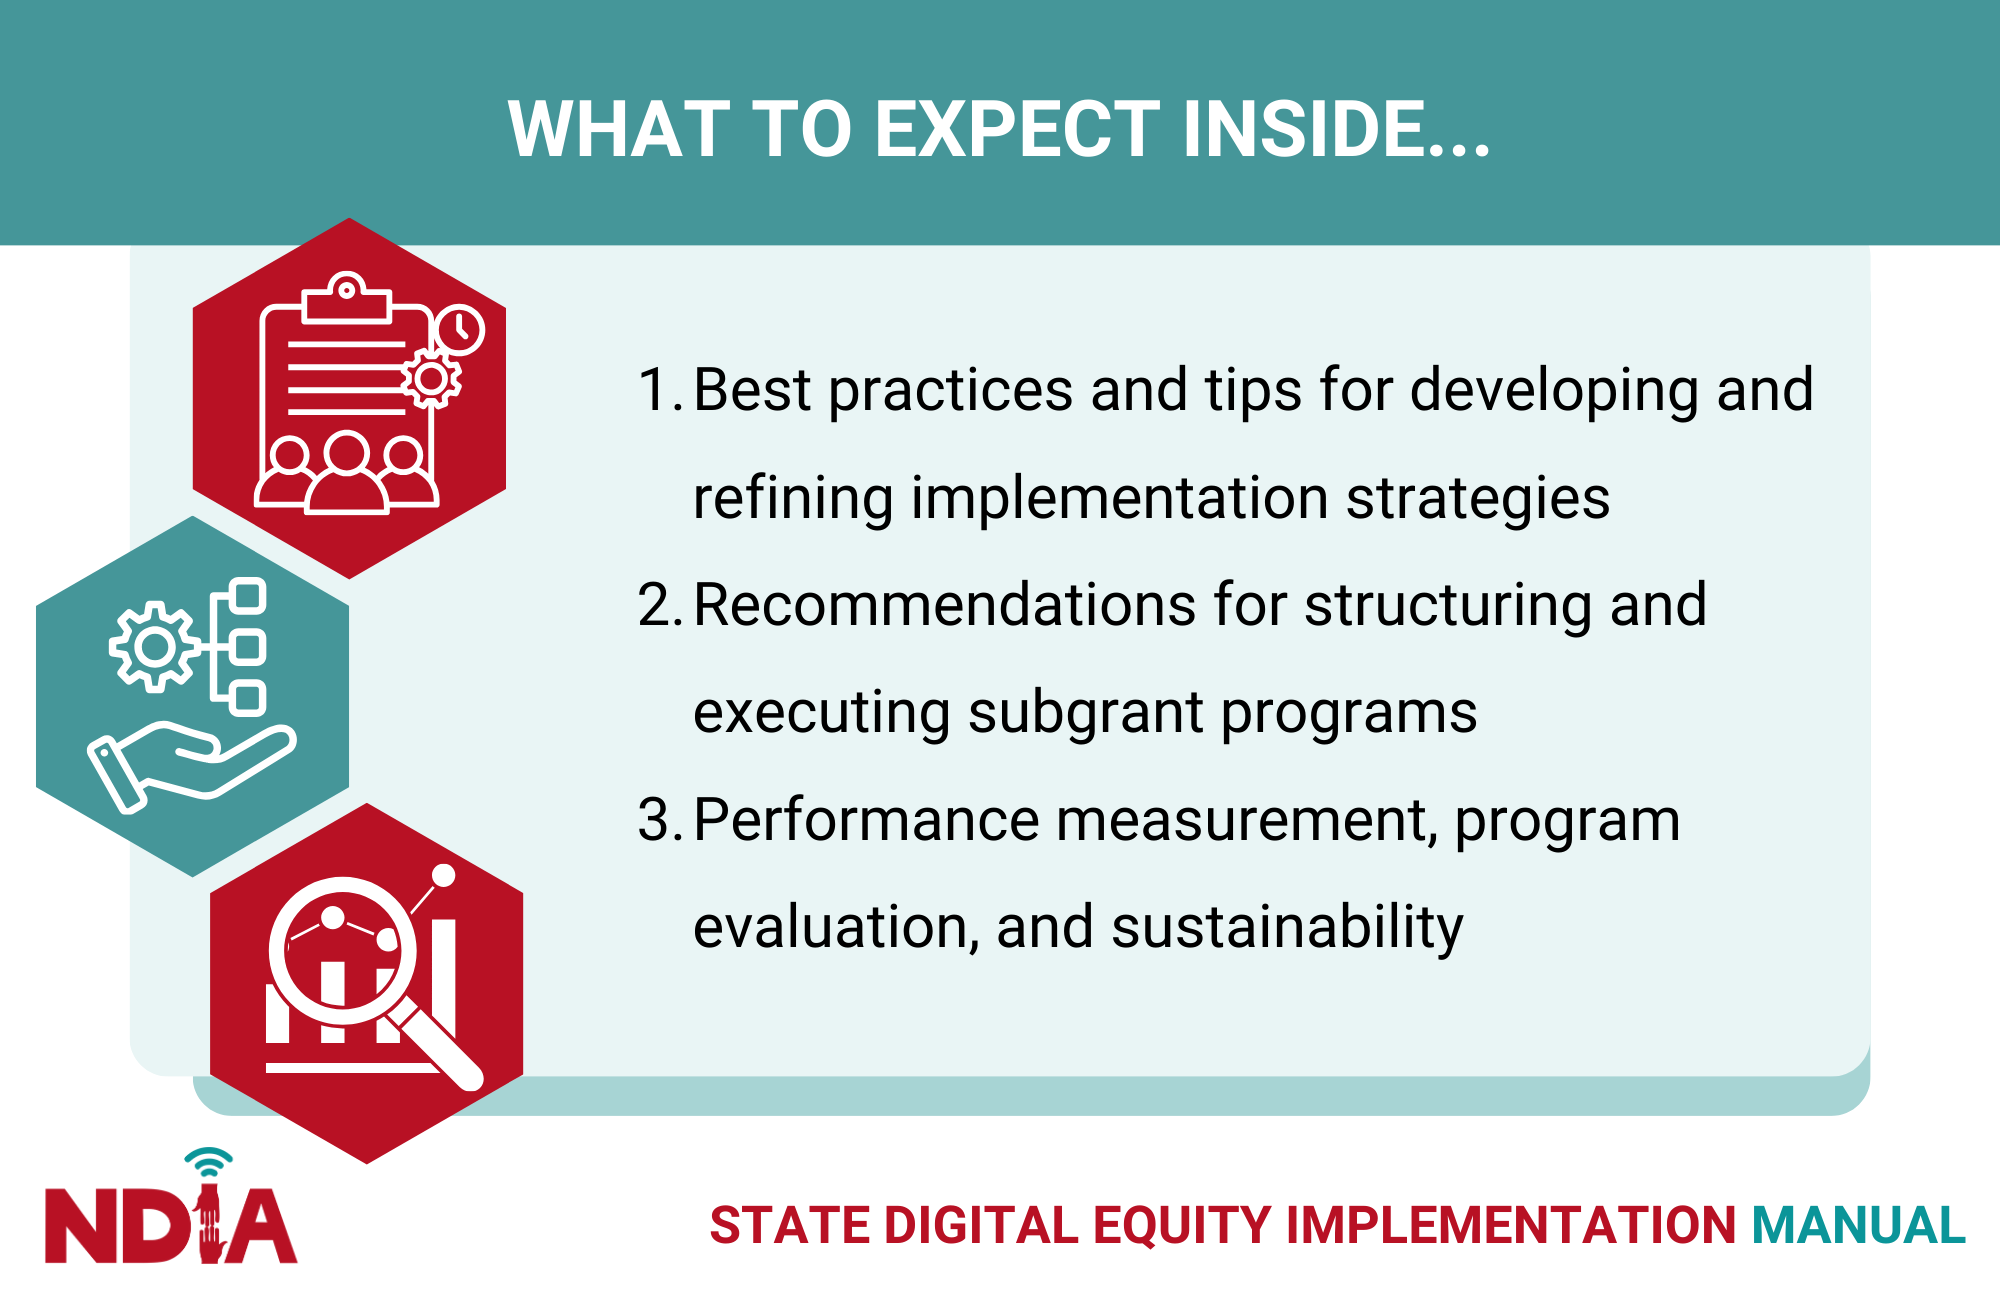 State Digital Equity Implementation Manual promo graphic